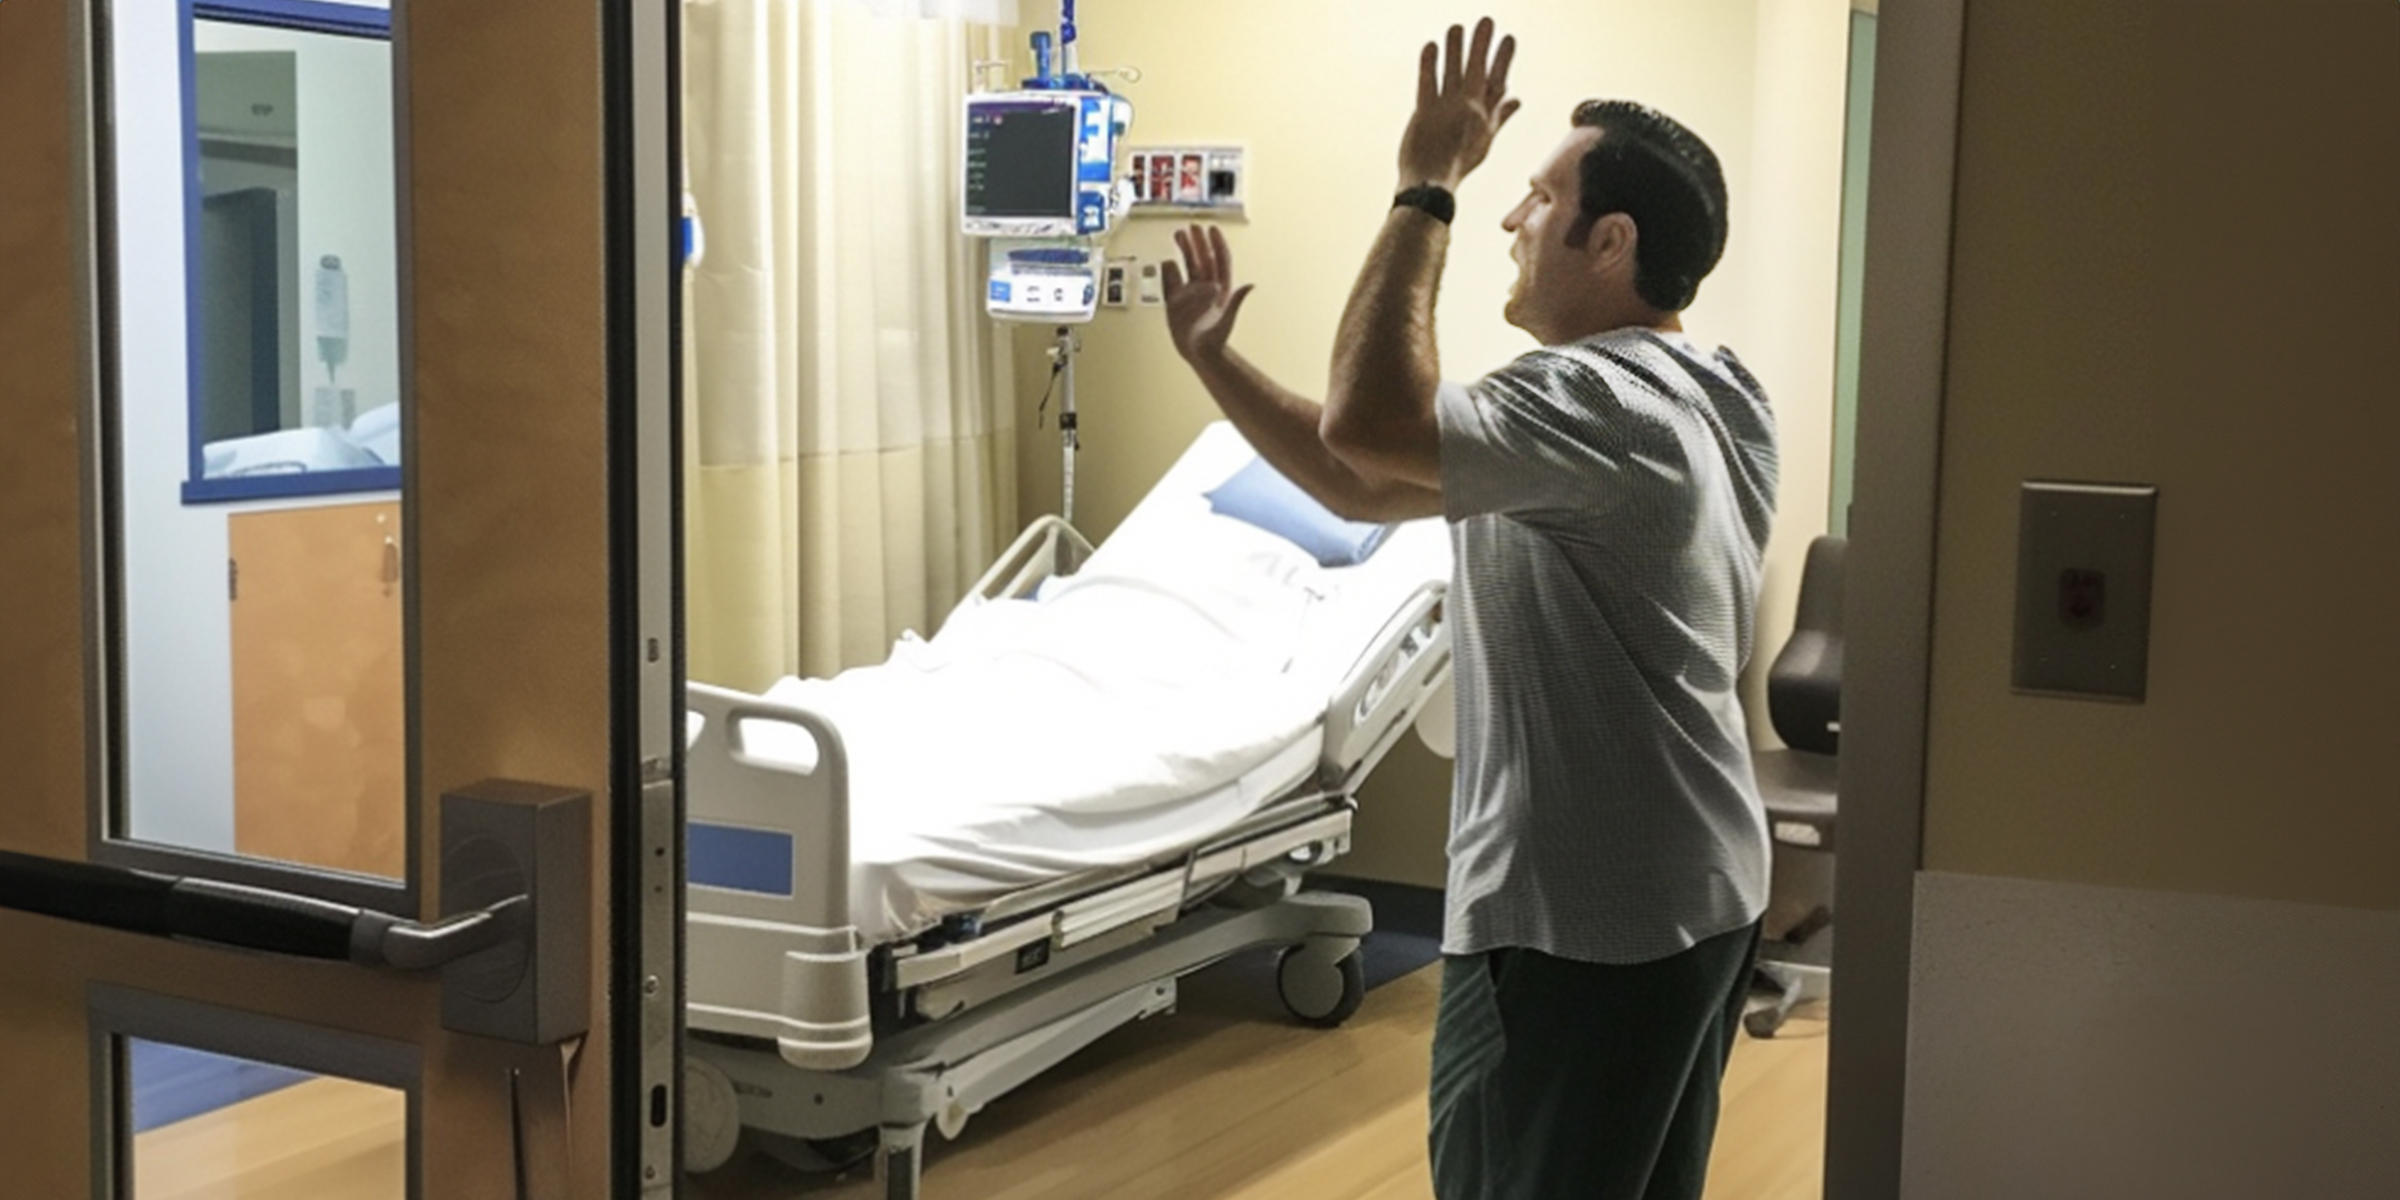 A man raising his arms in anger in a hospital room | Source: Amomama